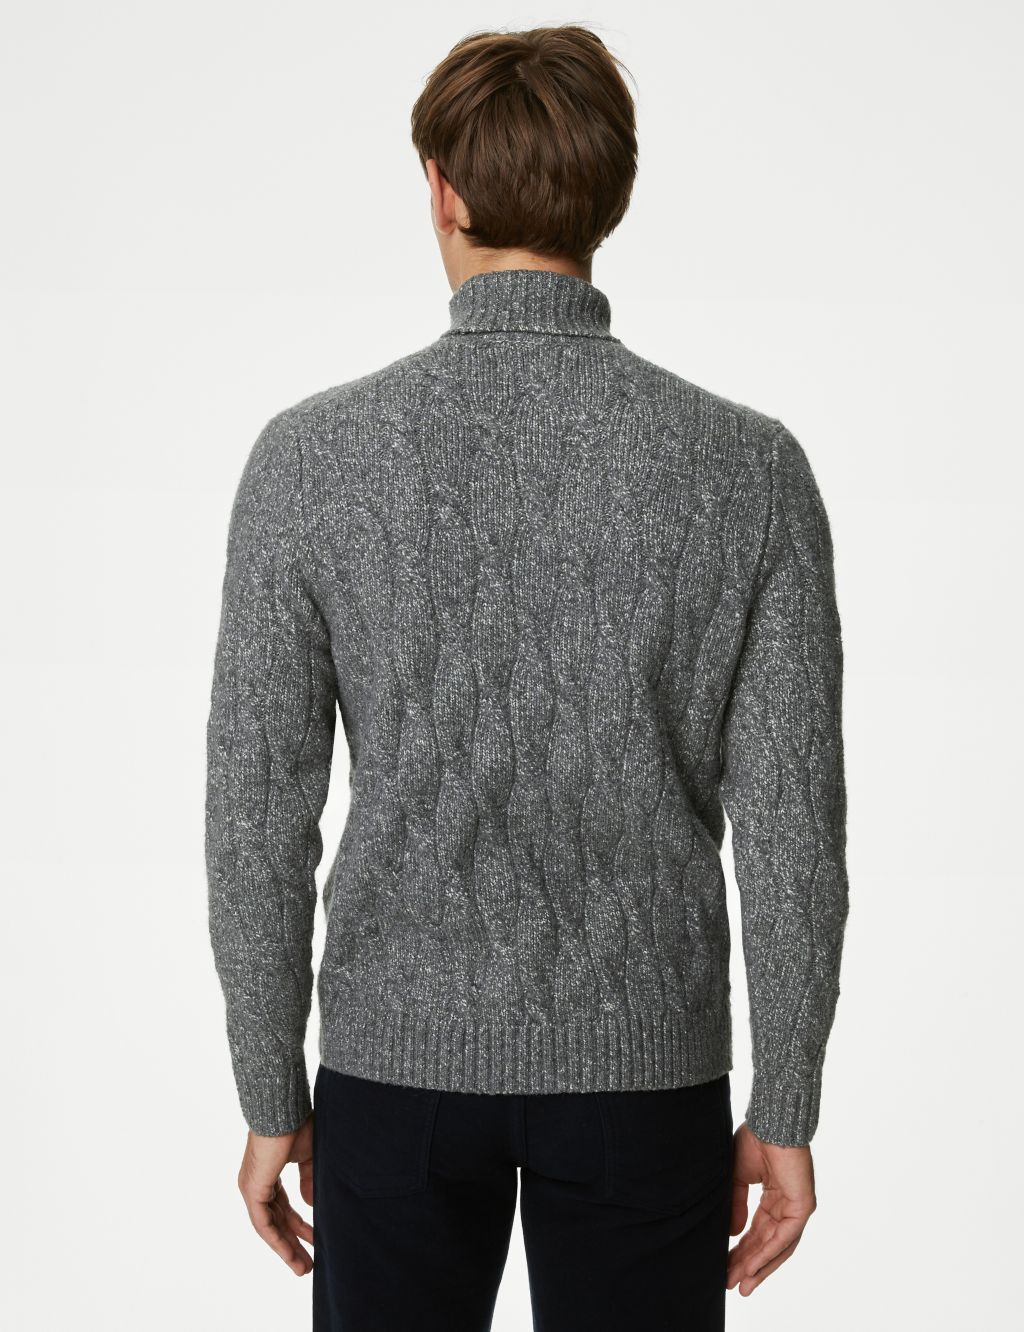 Cable High Neck Jumper image 5